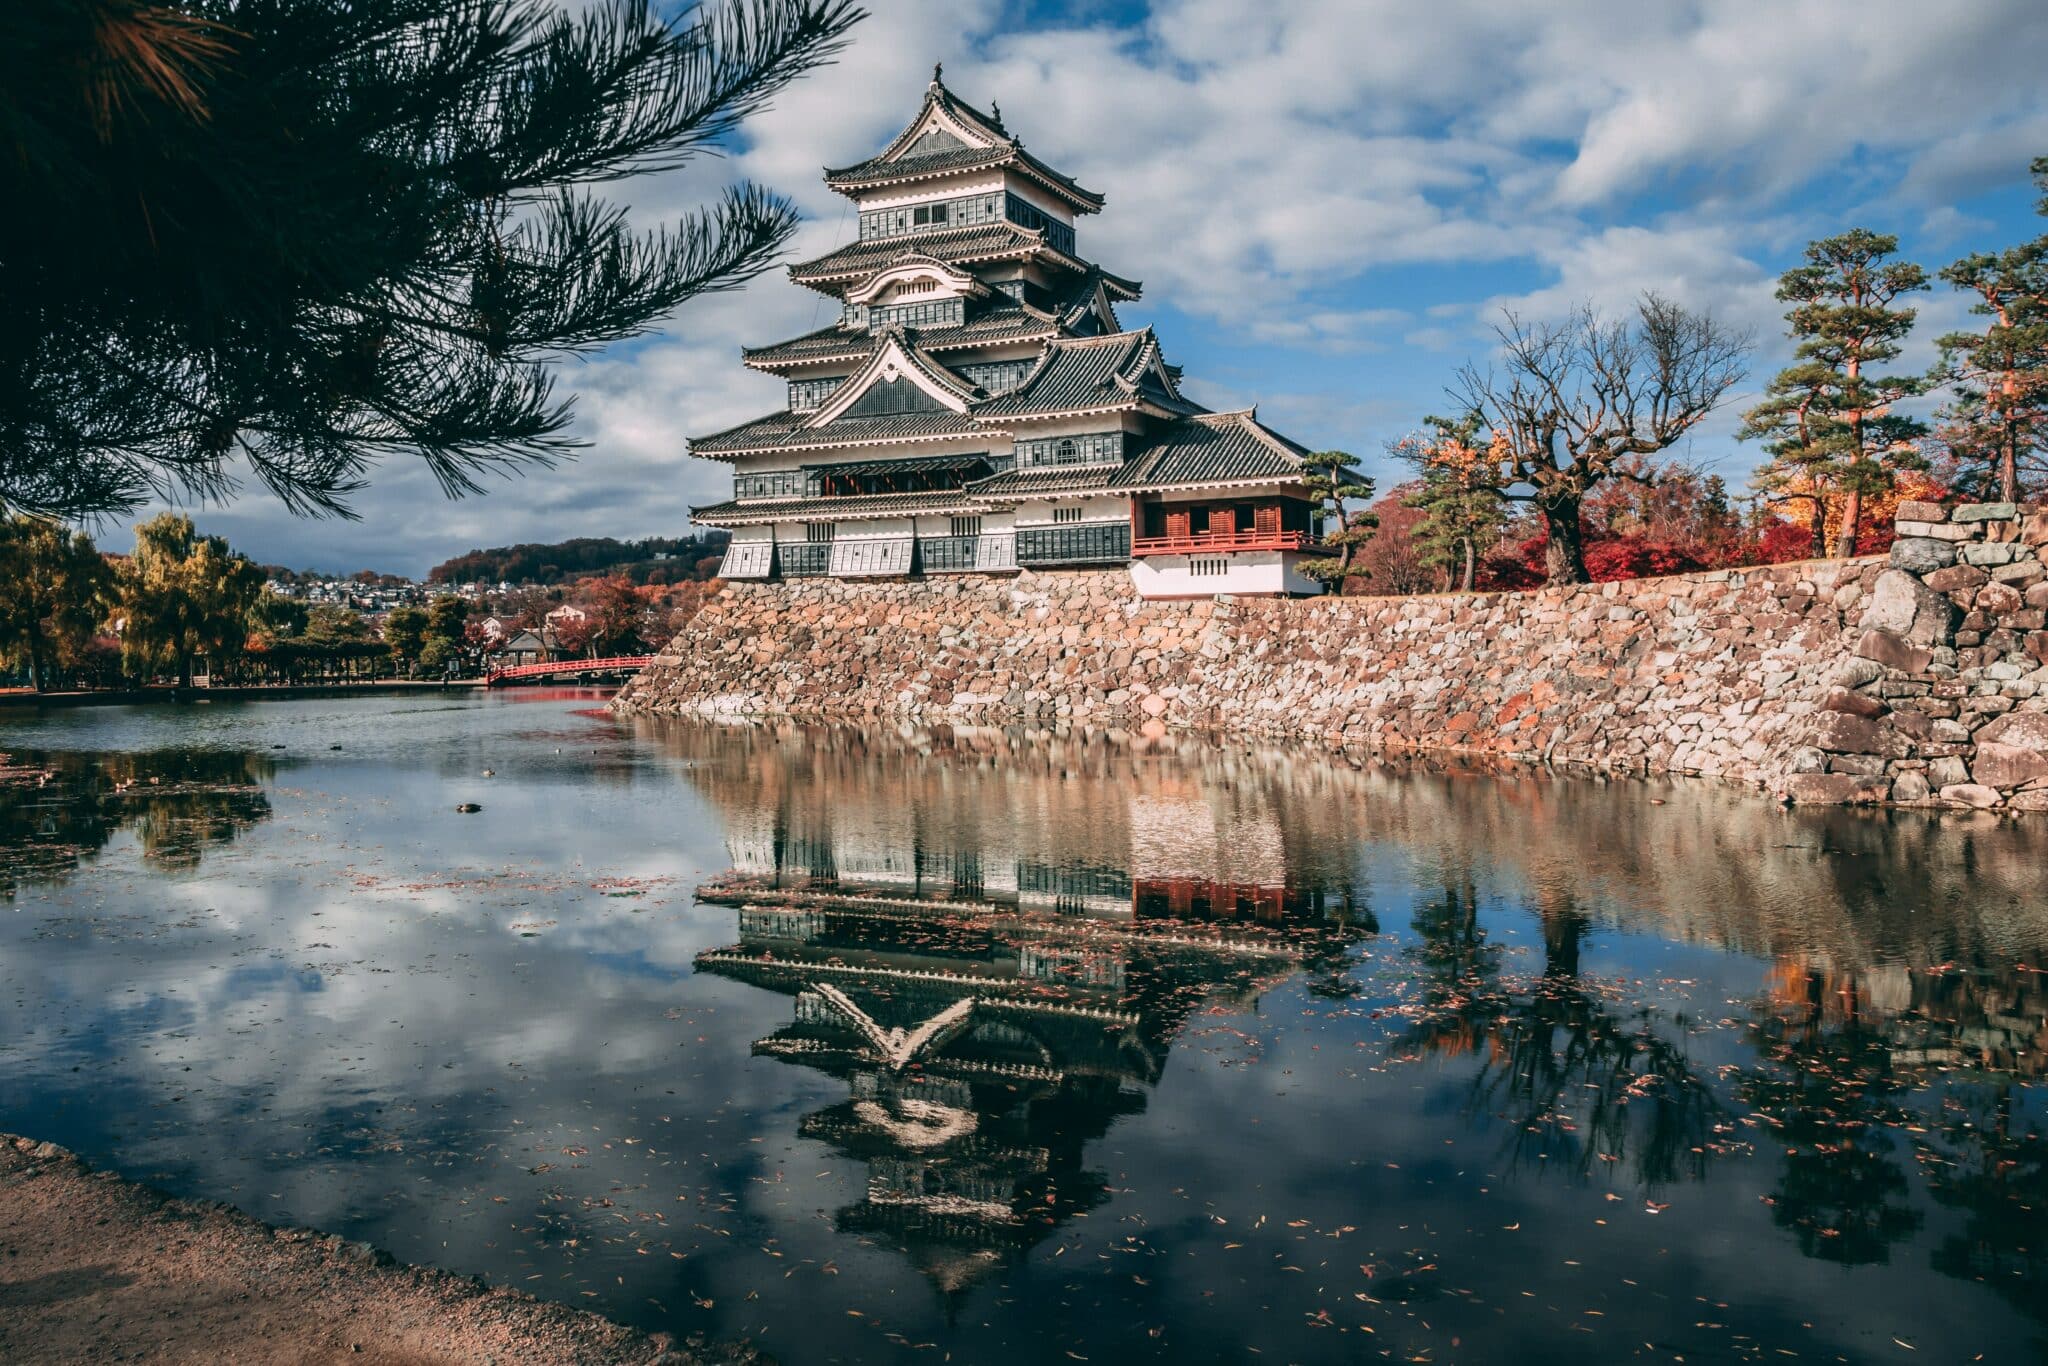 What Are The 21 Things You Should Know About Japan Before Going There